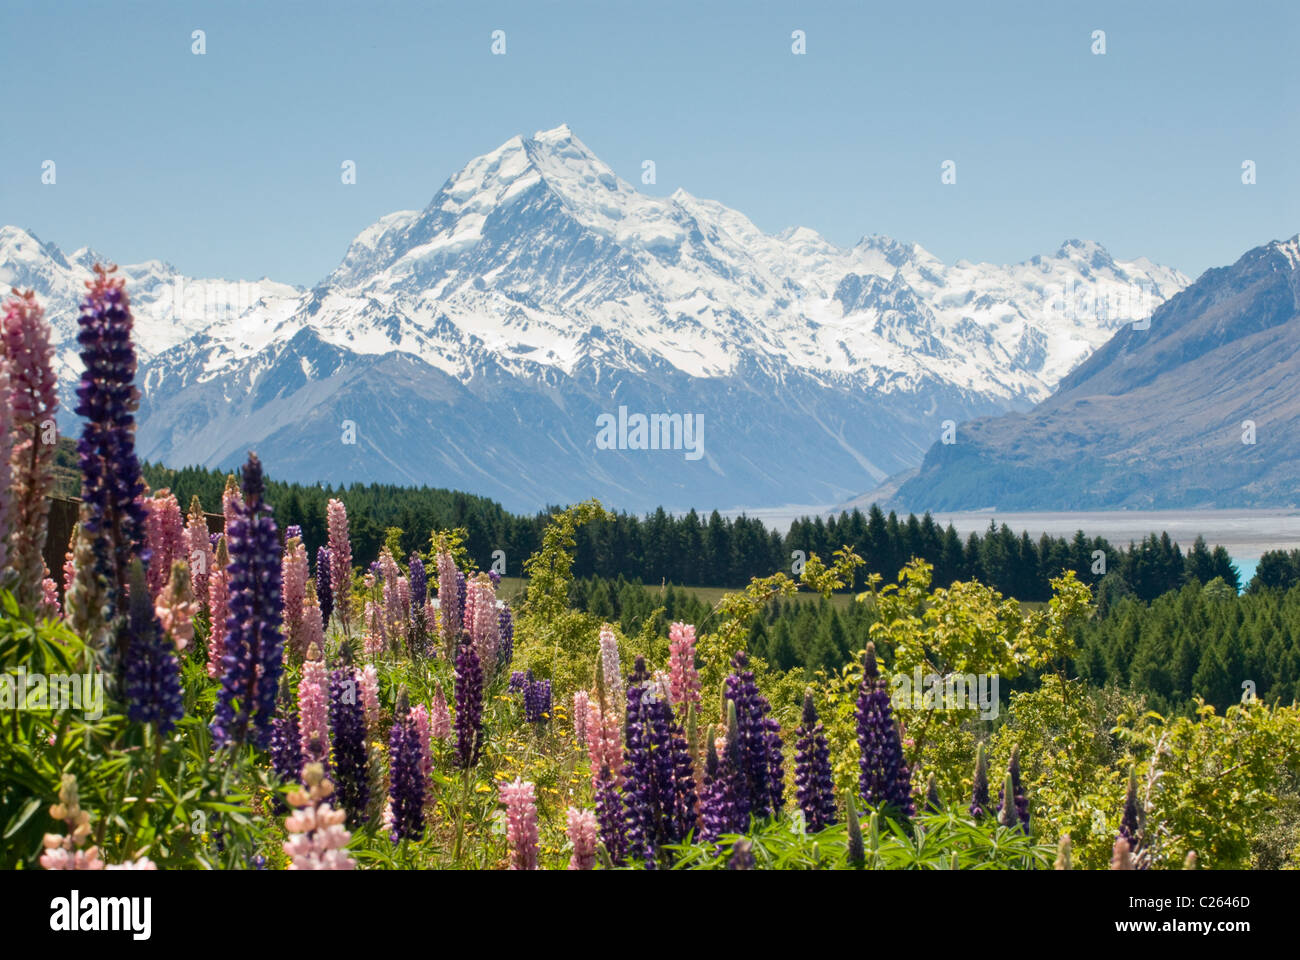 Flowering lupins near Lake Pukaki, with Mt Cook in the background, South Island of New Zealand Stock Photo